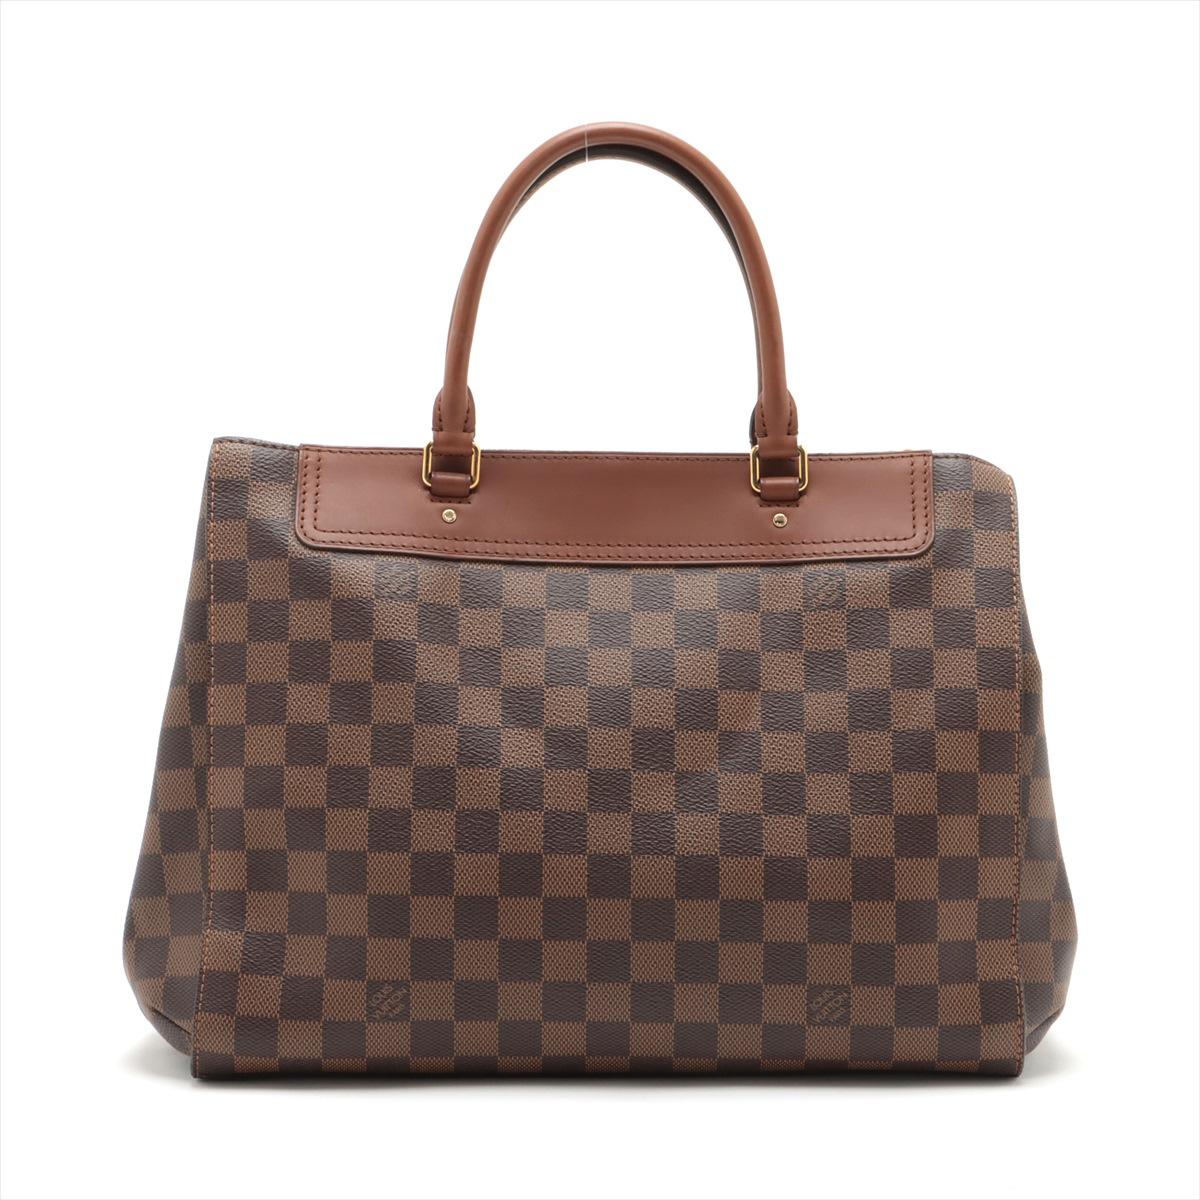 Louis Vuitton Damier Ebene Greenwich Two - Way Handbag In Good Condition For Sale In Indianapolis, IN